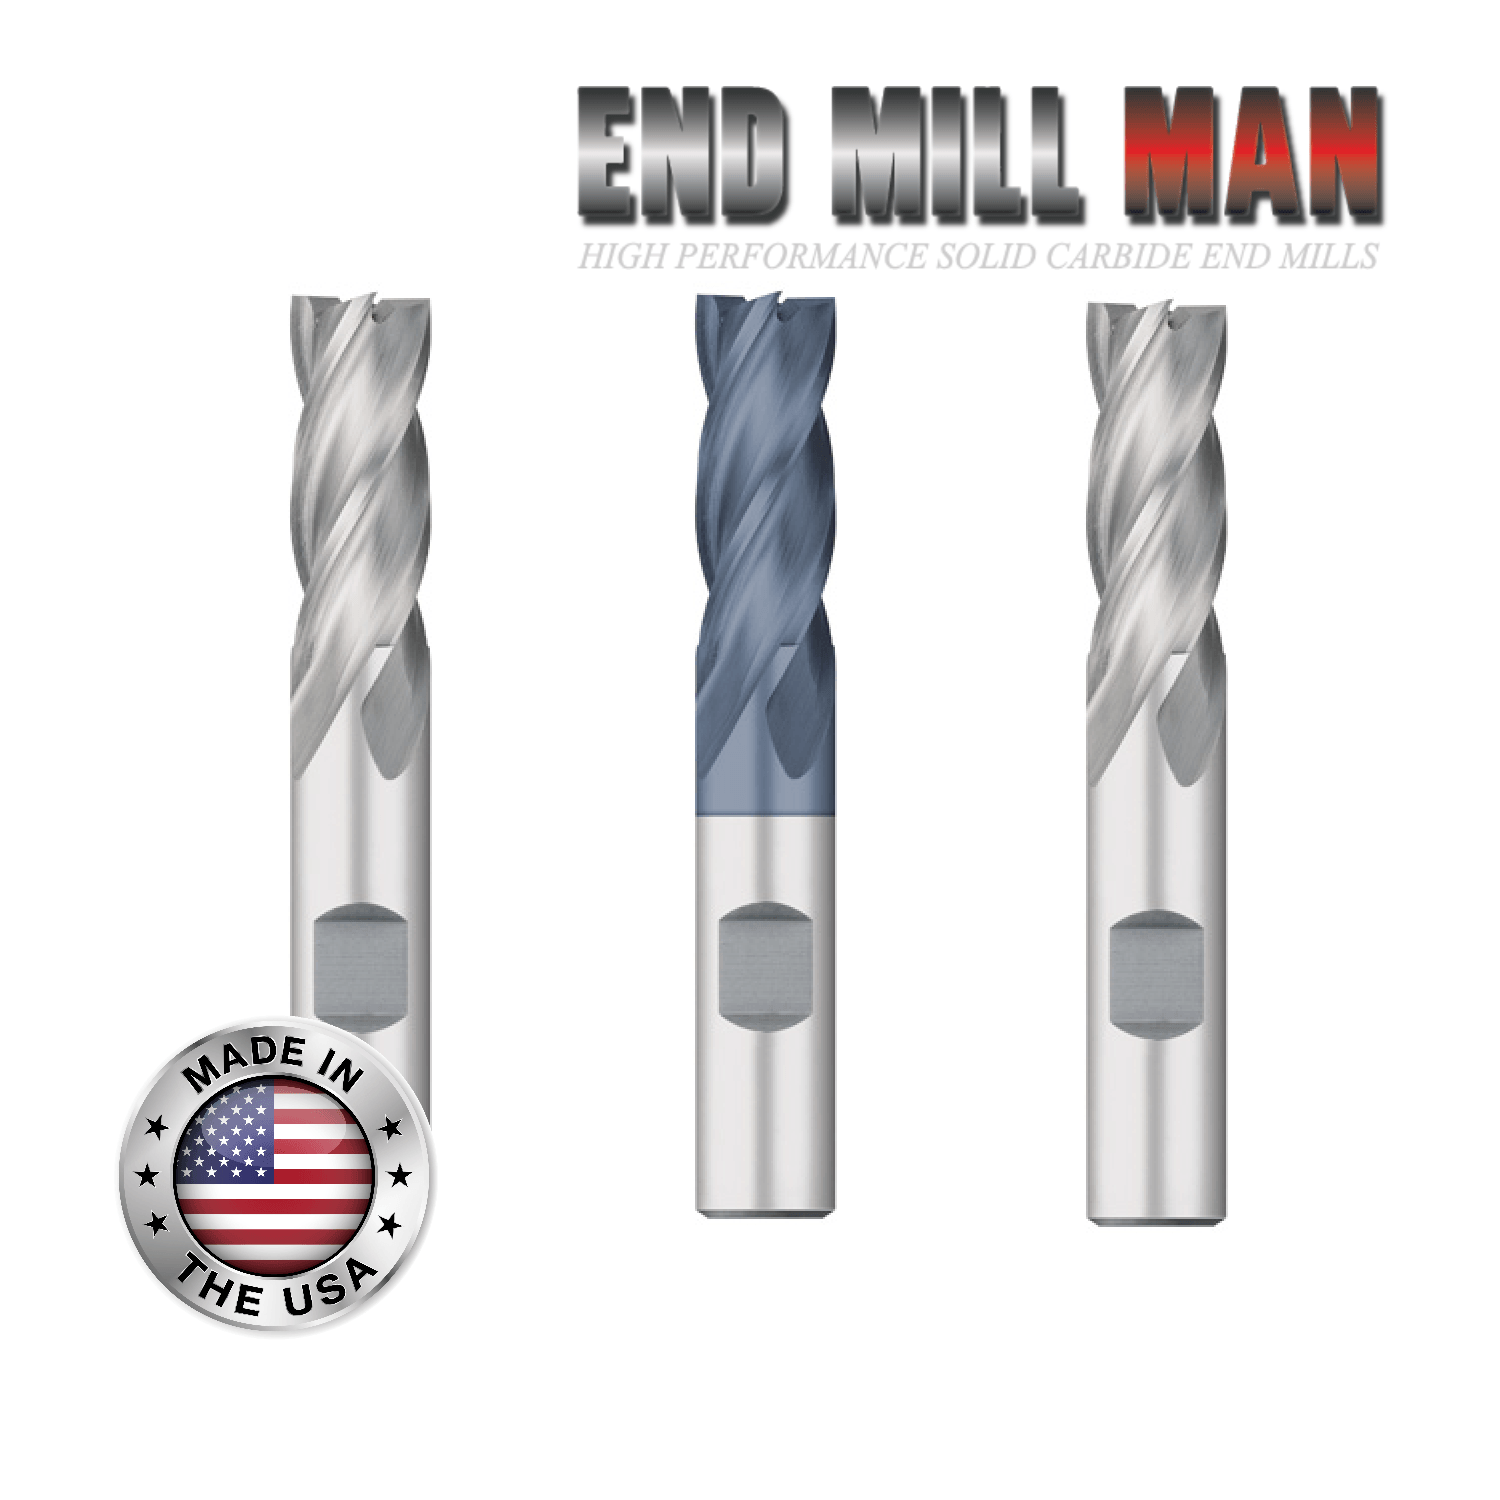 7/8" x 1-7/8" LOC (3 Pack) HSS 4 Flute End Mills (7/8" Shanks) - The End Mill Store 